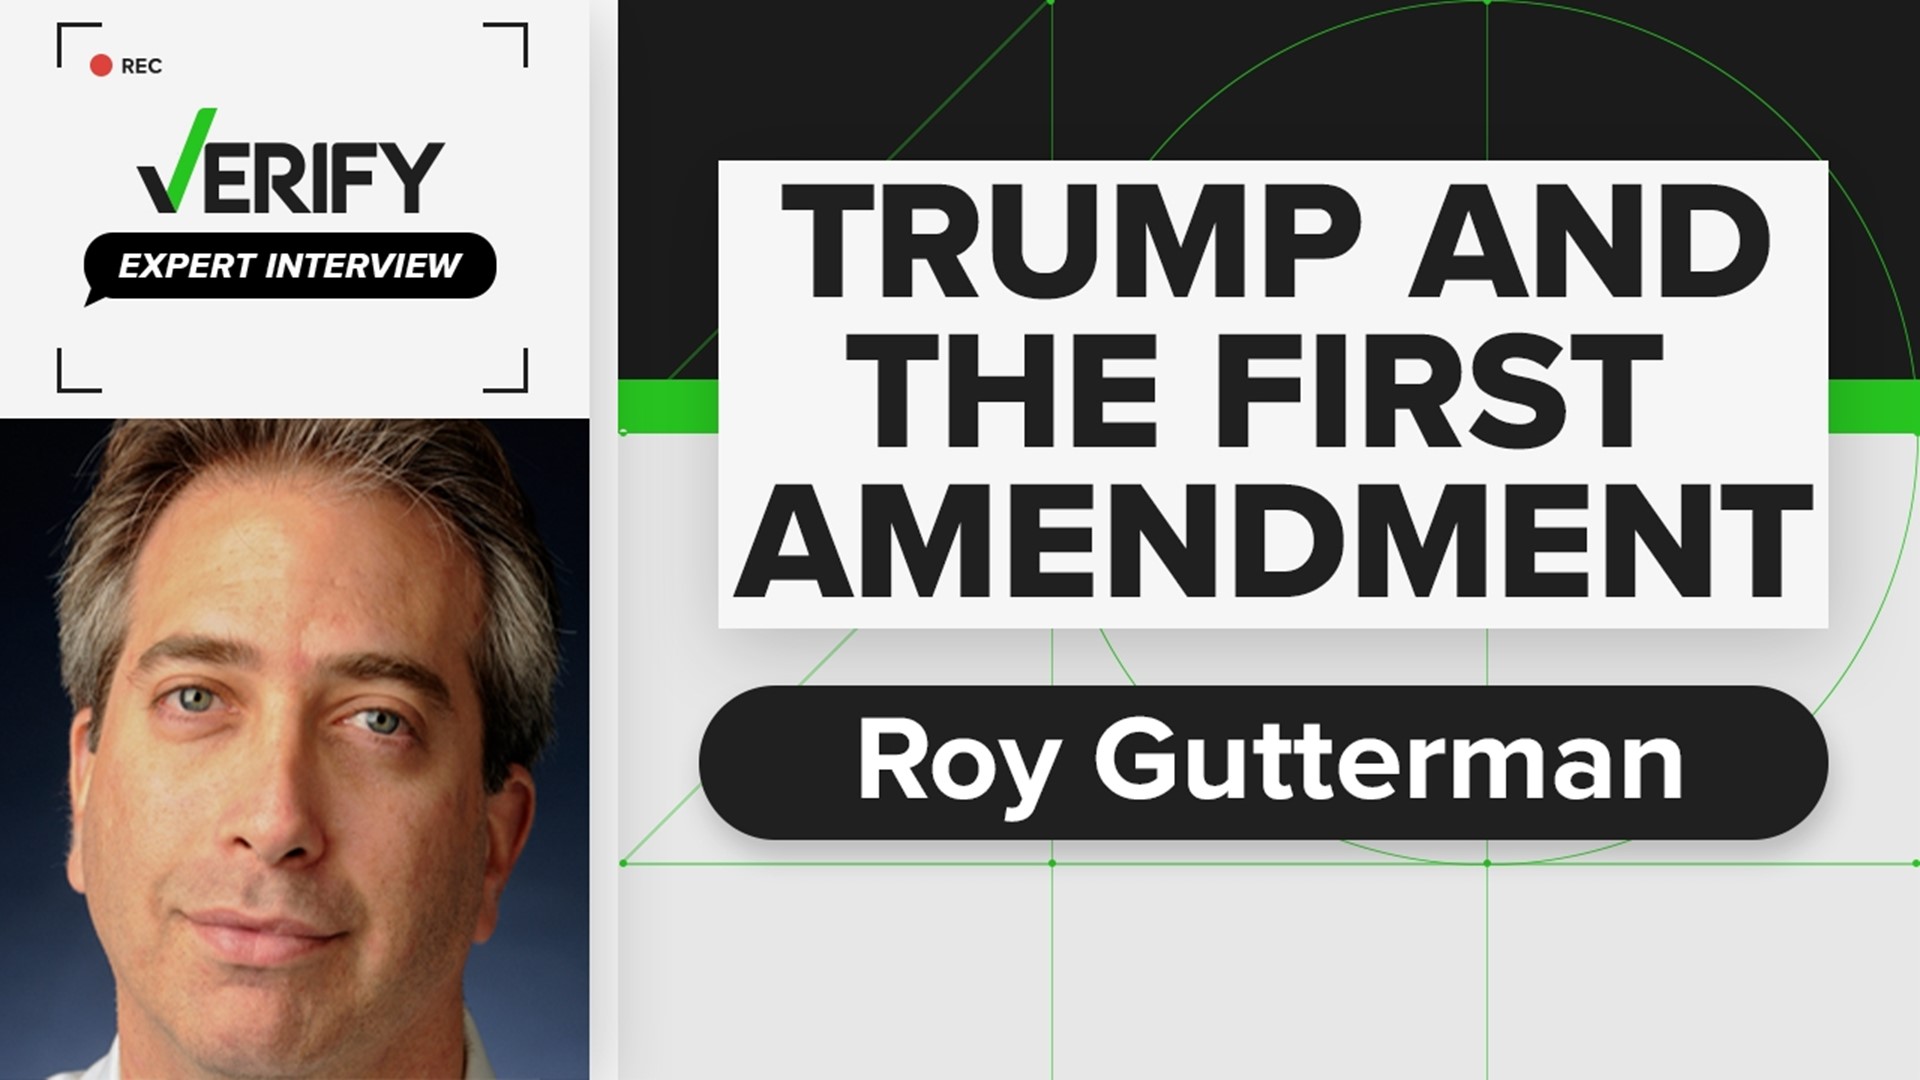 Roy Gutterman is the Director of the Tully Center for Free Speech at the Newhouse School of Public Communications at Syracuse University.